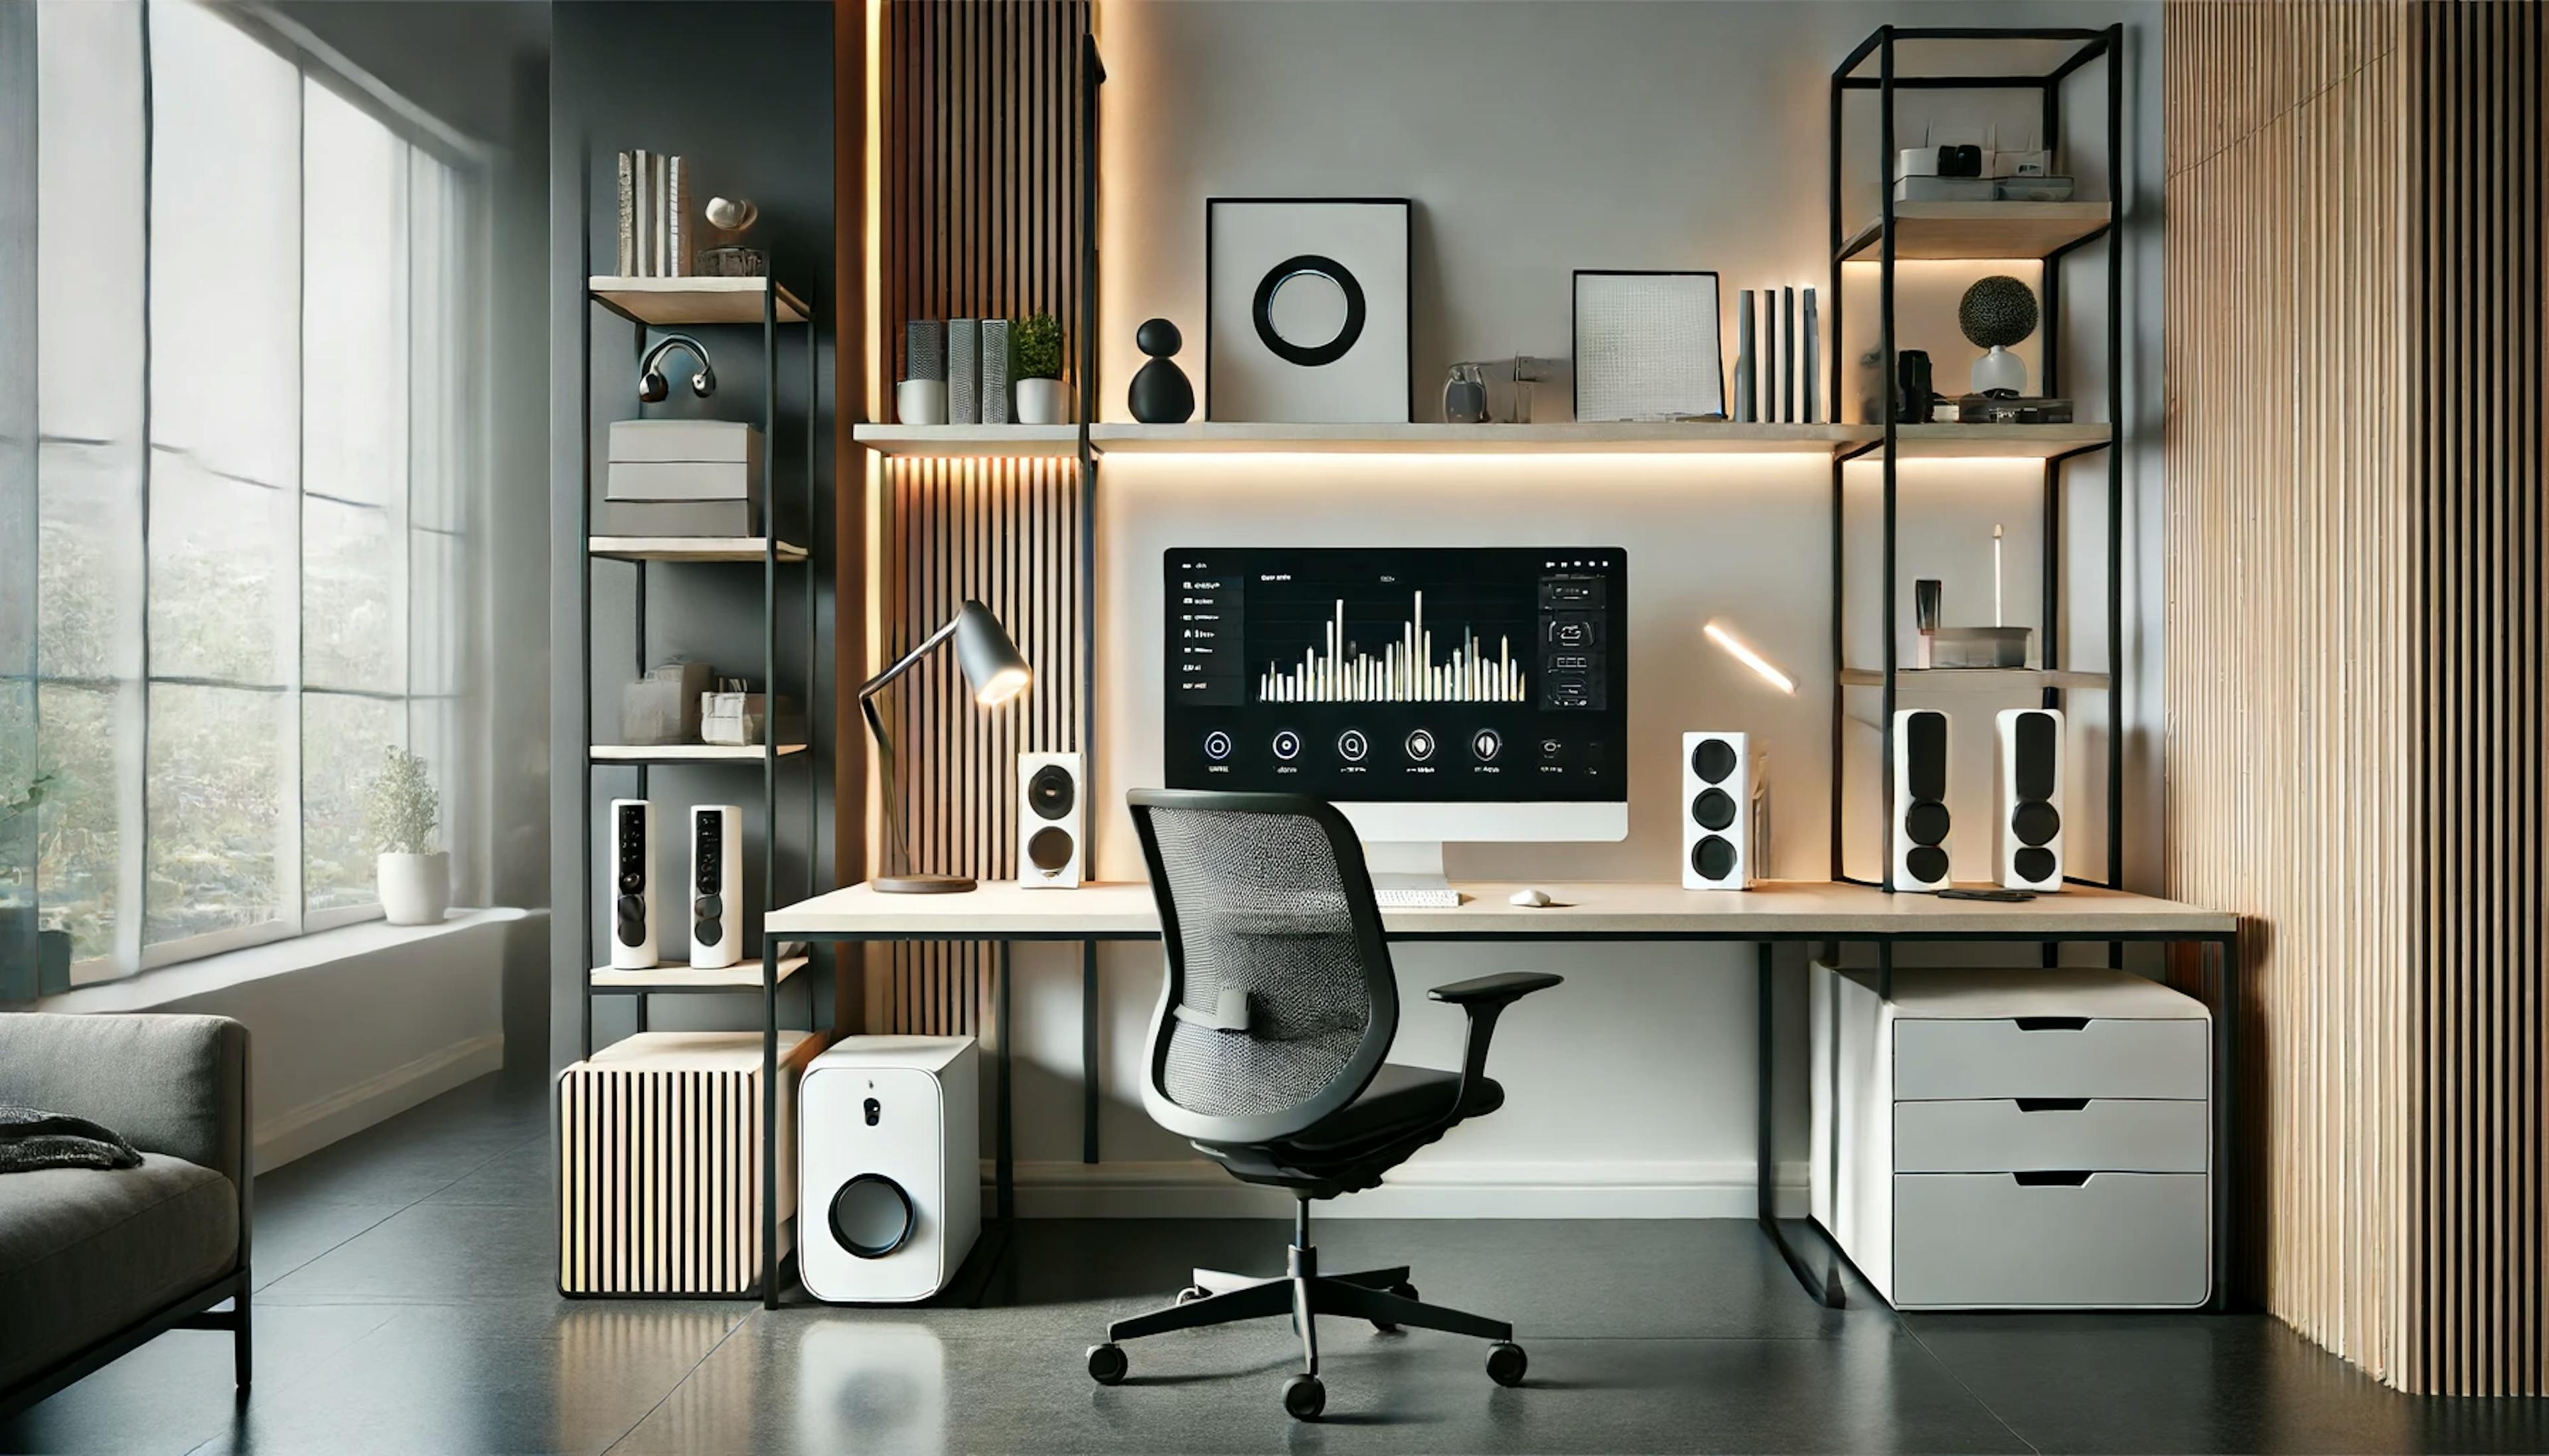 High-tech home office with minimalist furniture, smart devices, and innovative lighting solutions